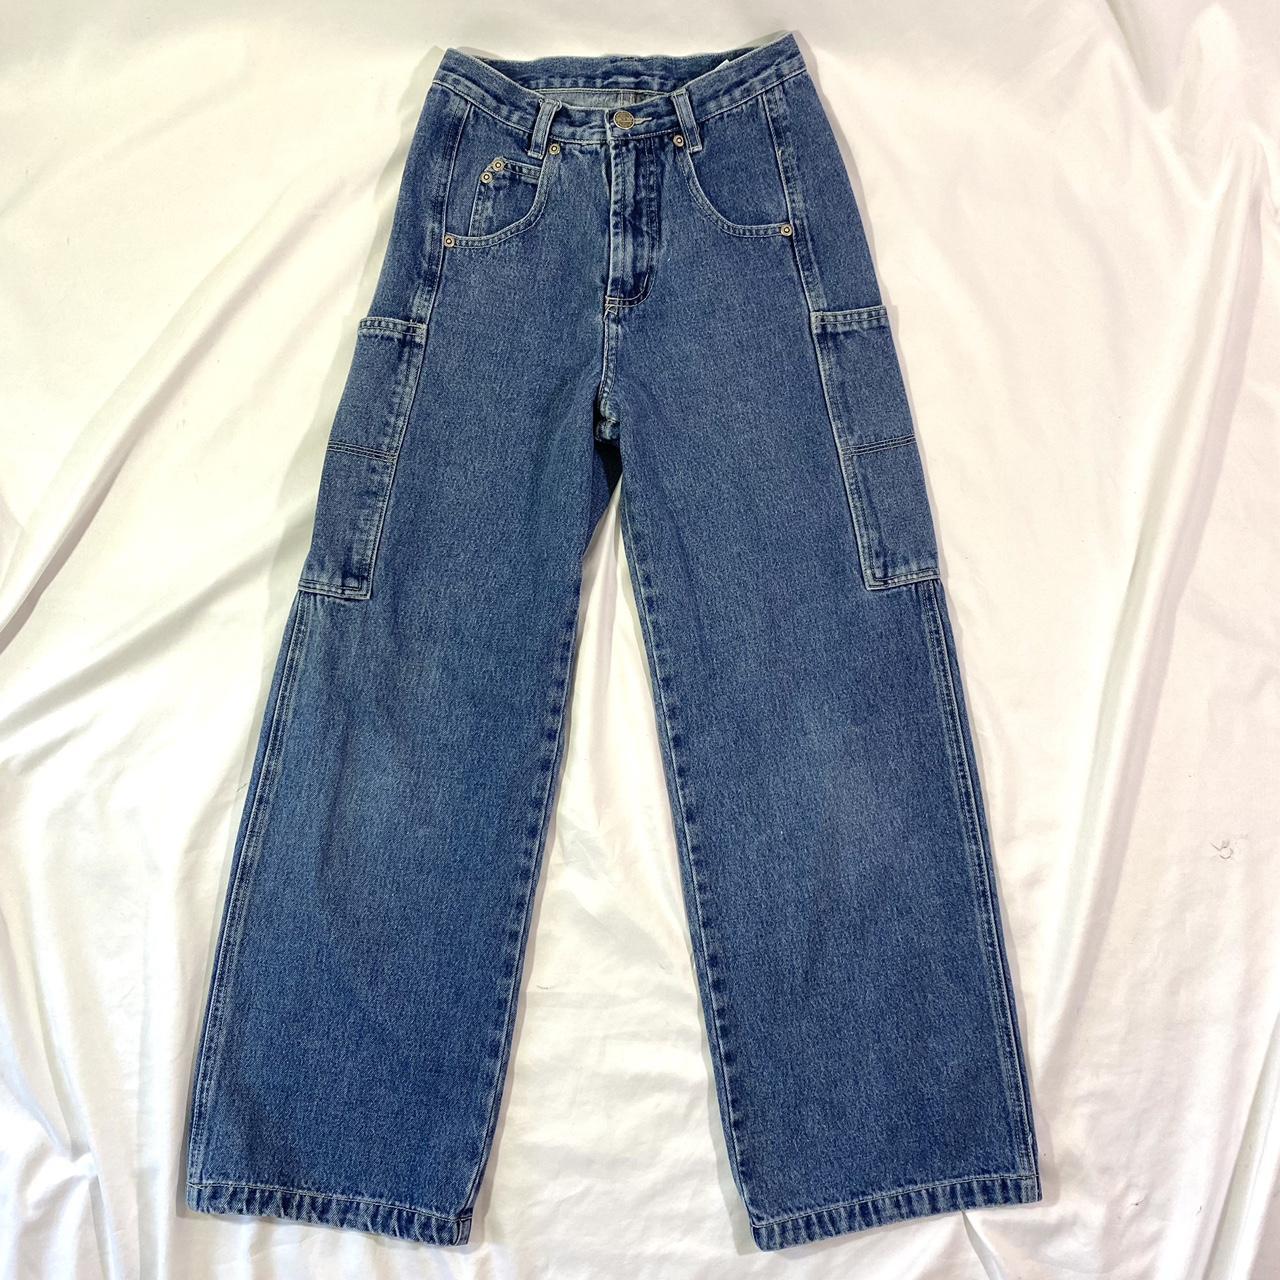 Kid’s vintage 90’s wide leg jeans from Arizona. The... - Depop